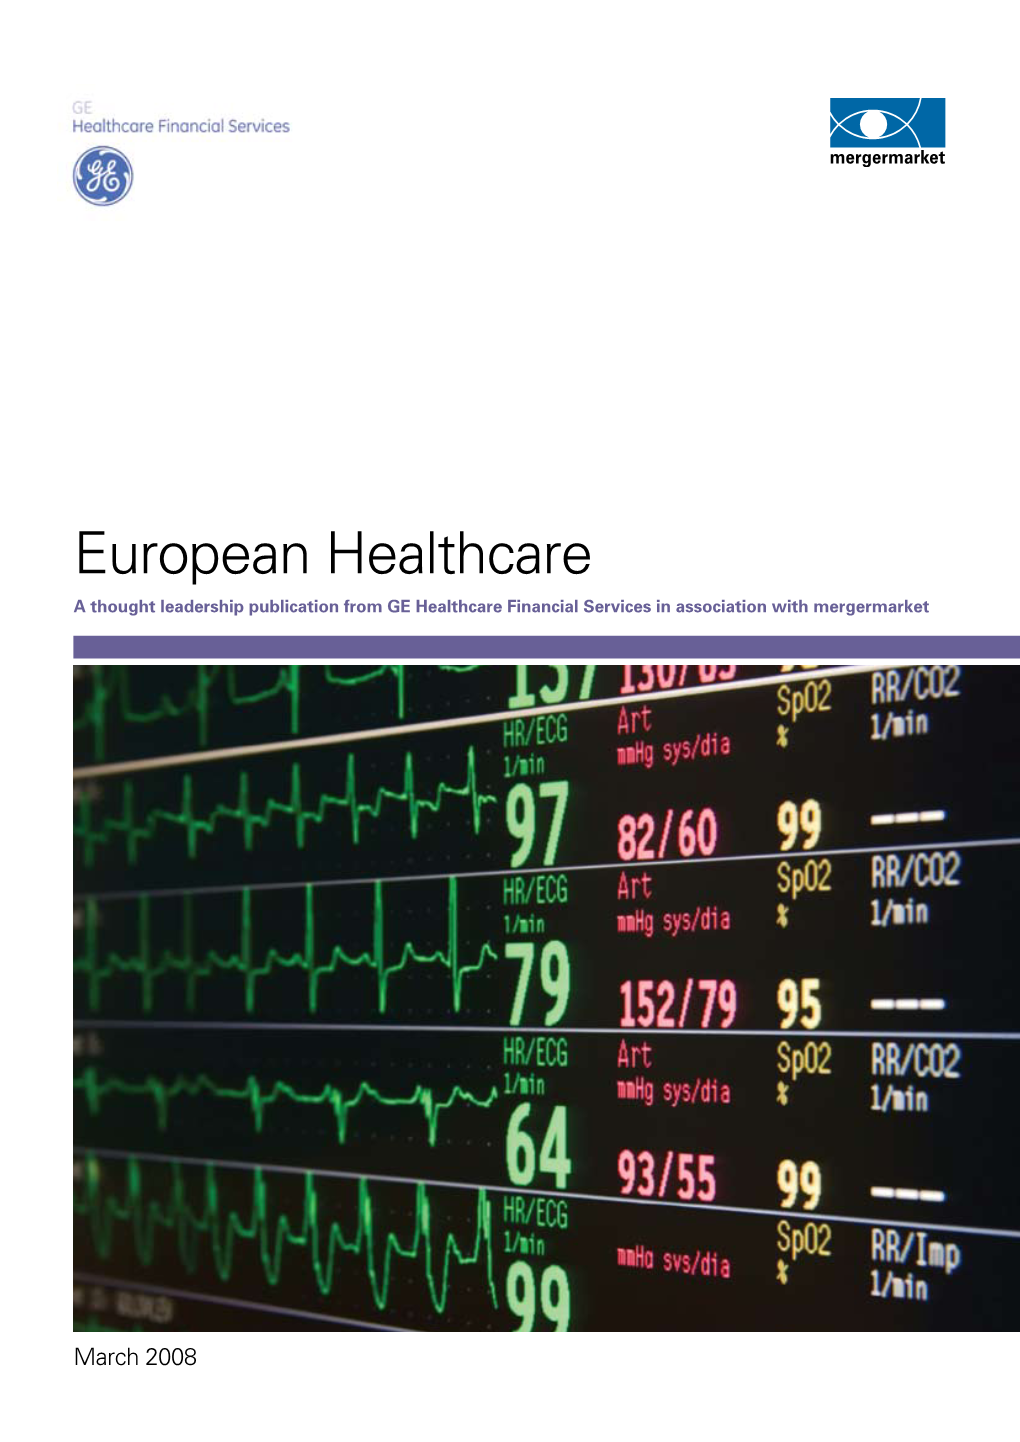 European Healthcare a Thought Leadership Publication from GE Healthcare Financial Services in Association with Mergermarket